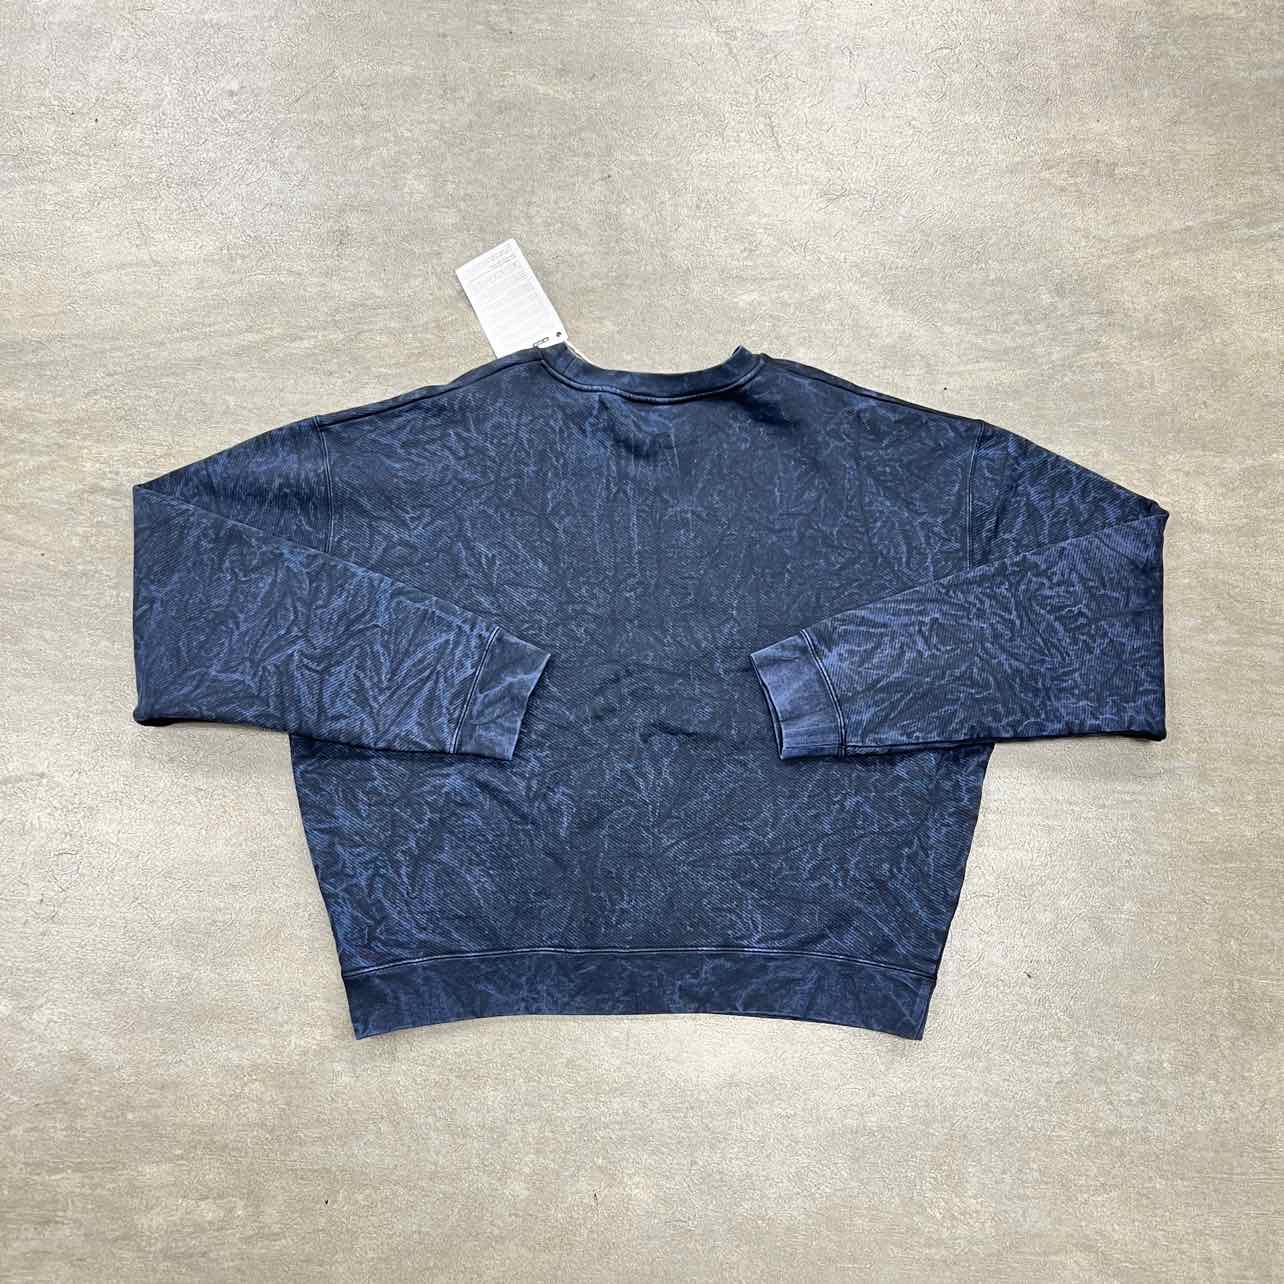 OFF-WHITE Crewneck Sweater &quot;MARBLE&quot; Blue Used Size 2XL